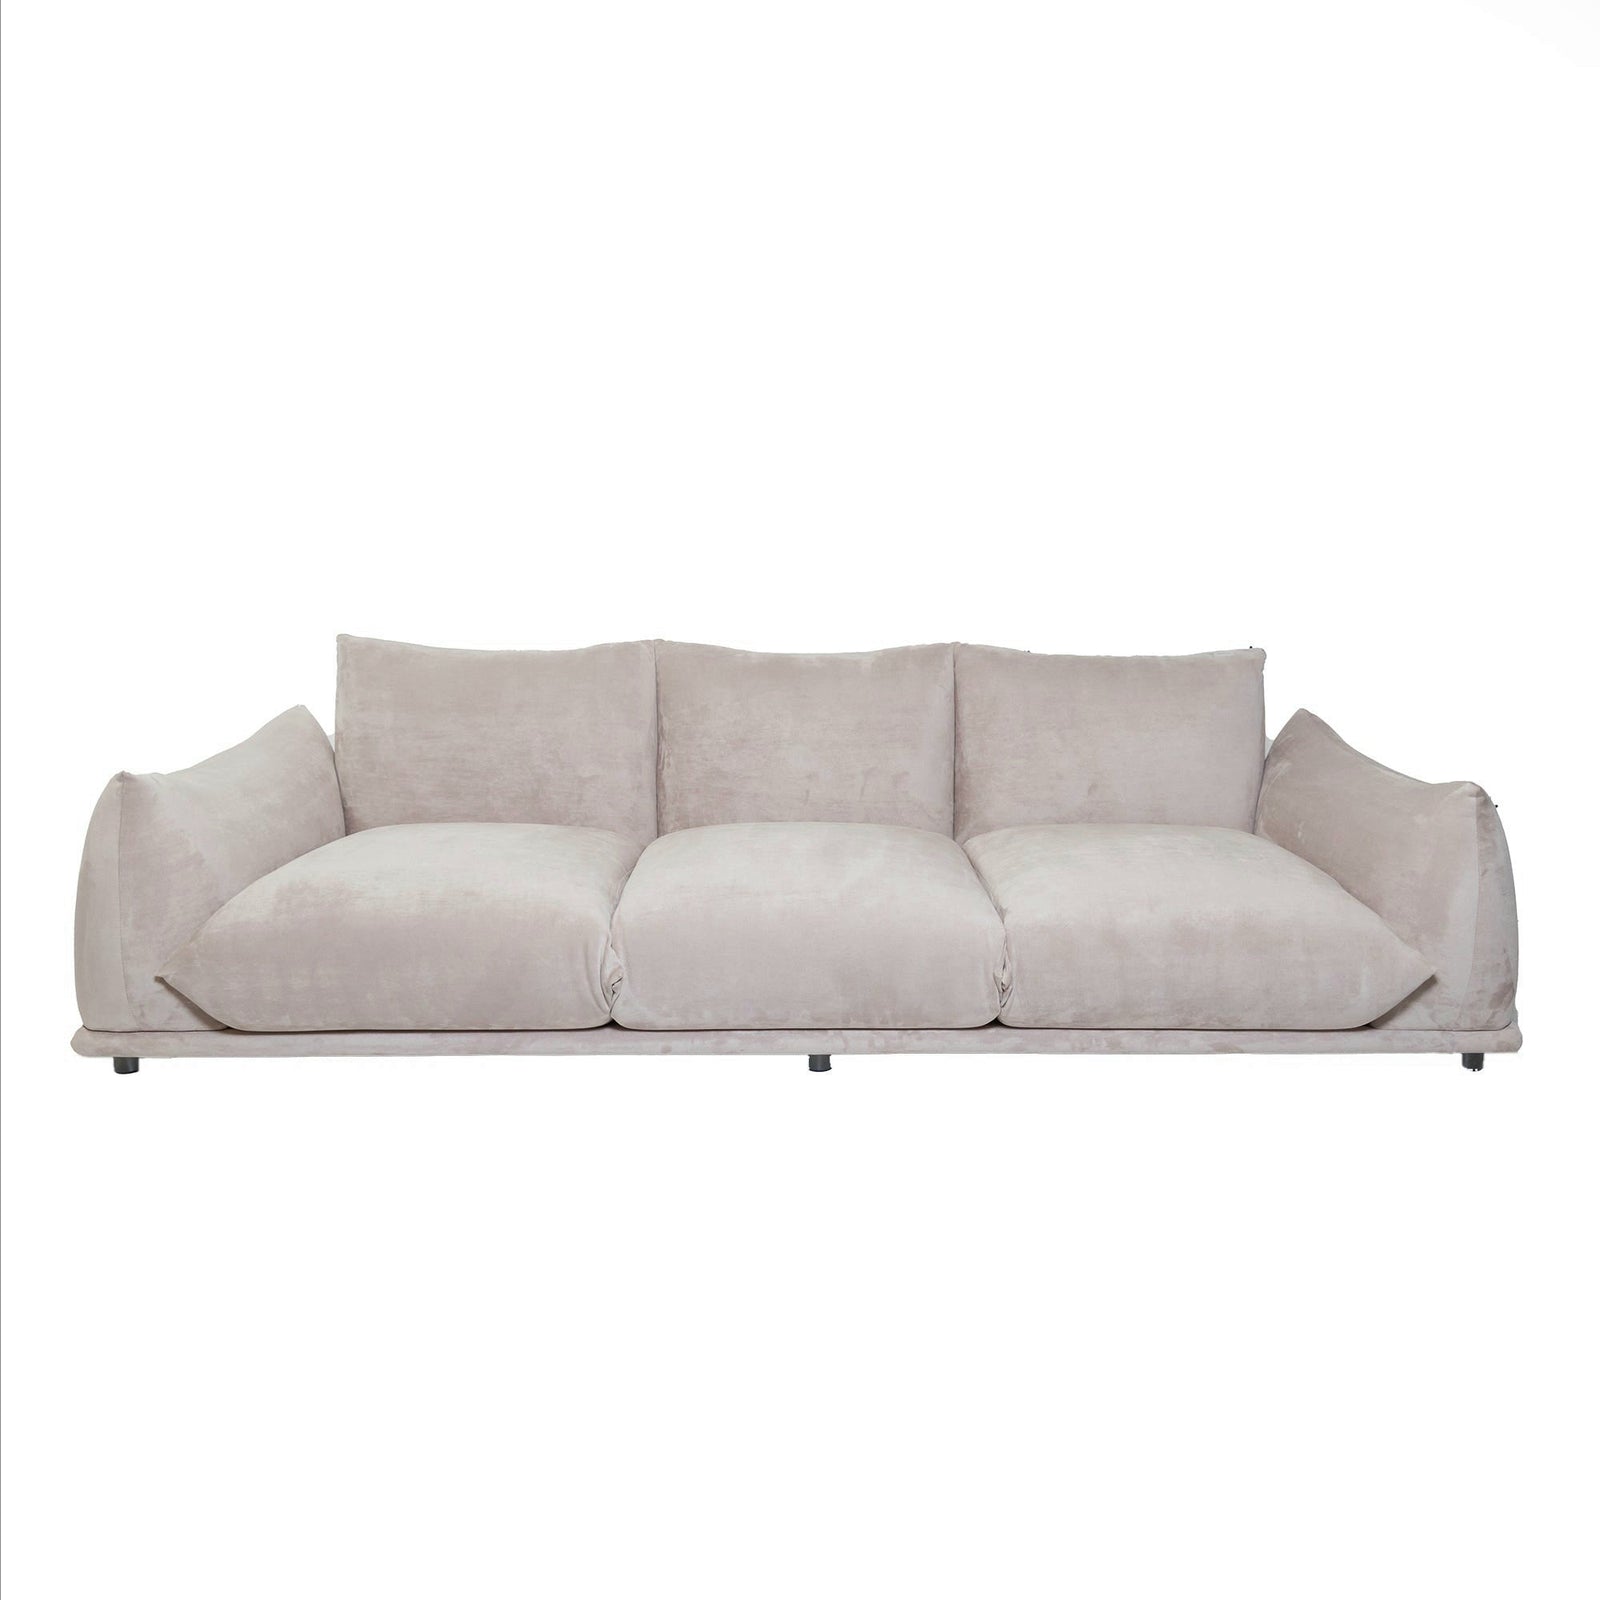 Marenco Style Sofa Light Grey Suede 3 Seater